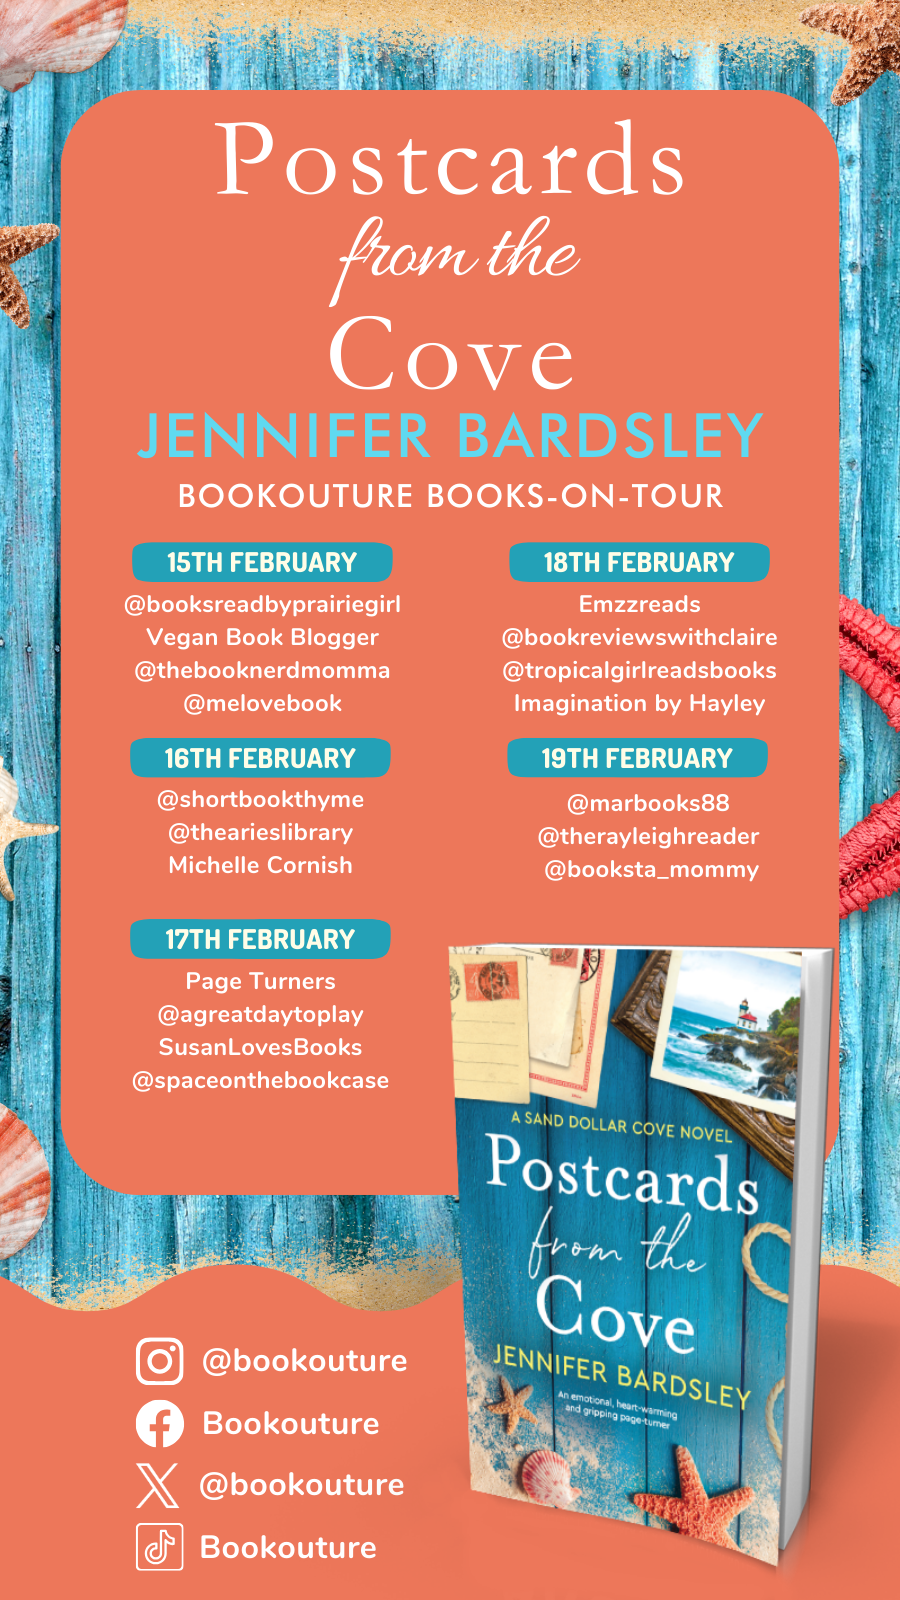 Blog Tour for Postcards from the Cove by Jennifer Bardsley